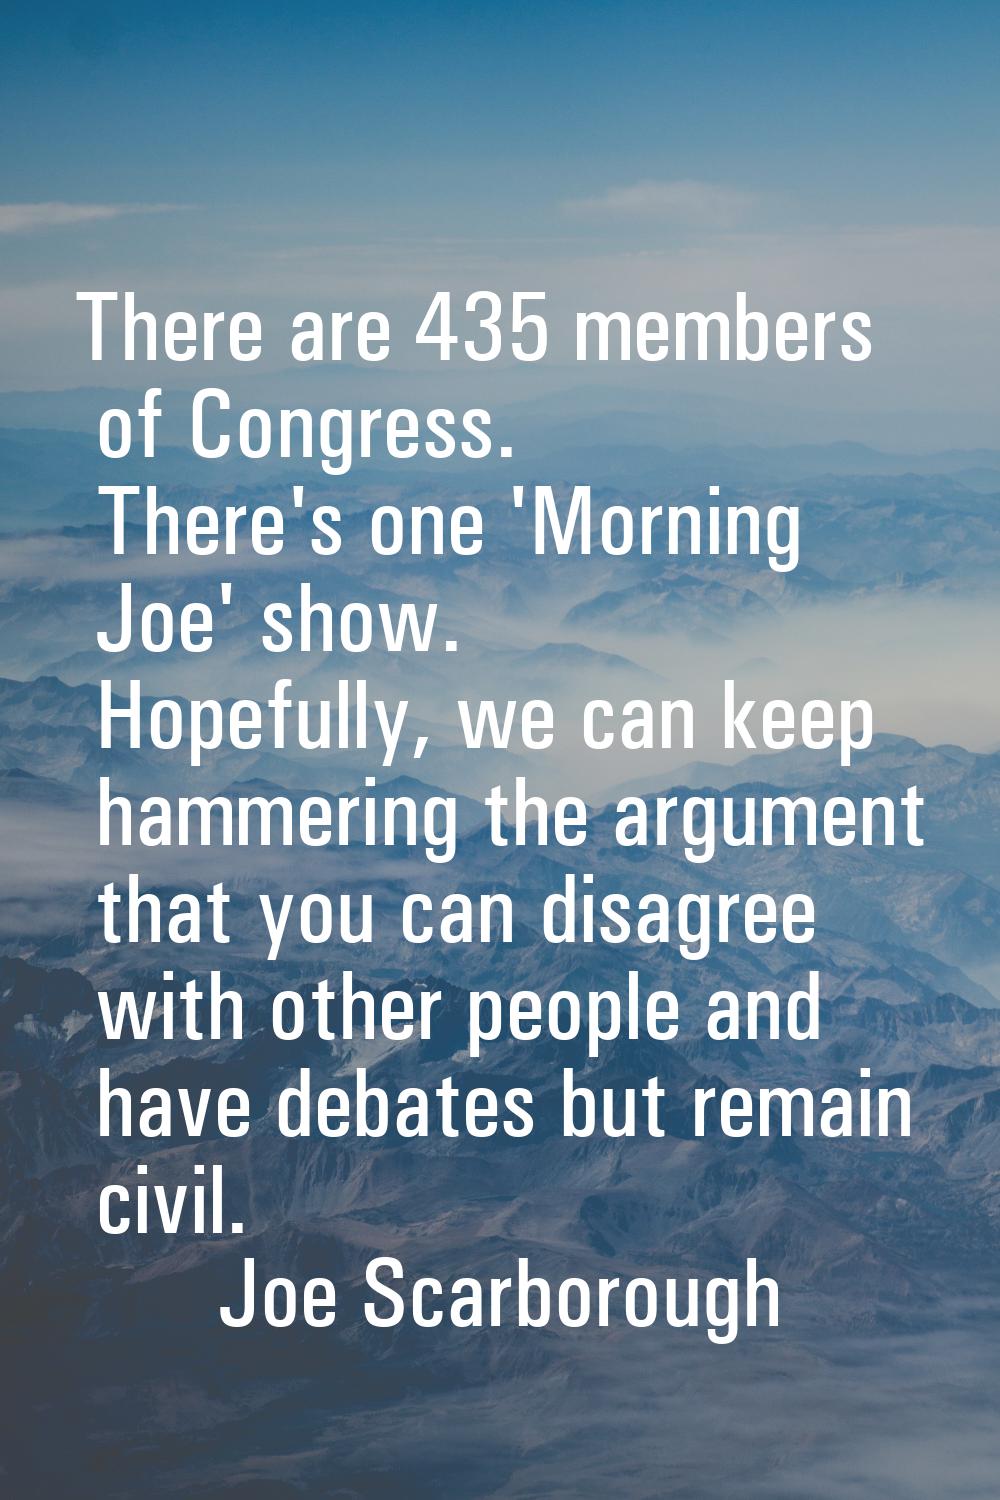 There are 435 members of Congress. There's one 'Morning Joe' show. Hopefully, we can keep hammering